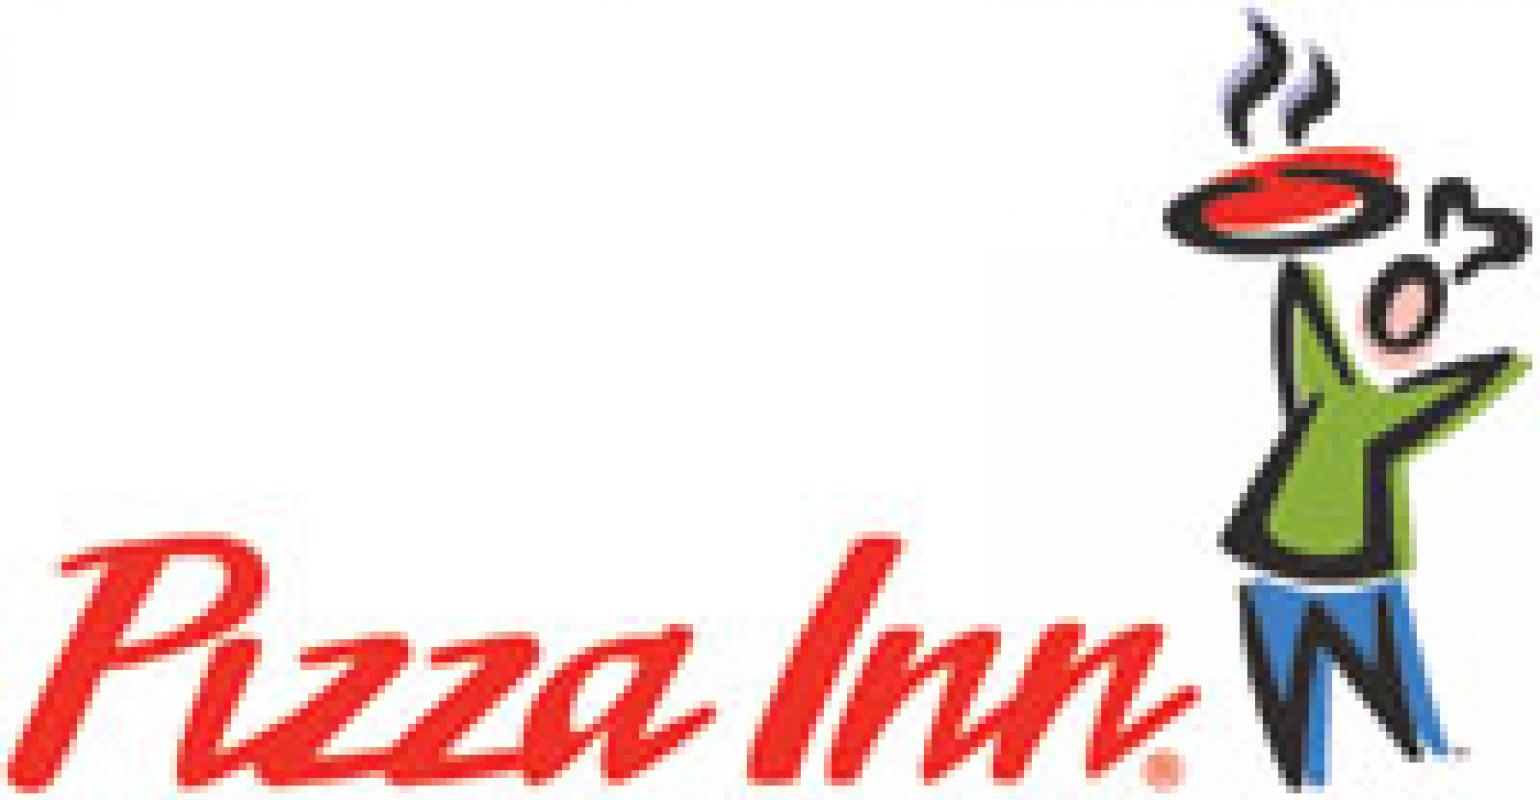 pizza-inn-debuts-cost-effective-unit-prototype-new-lines-of-communication-to-support